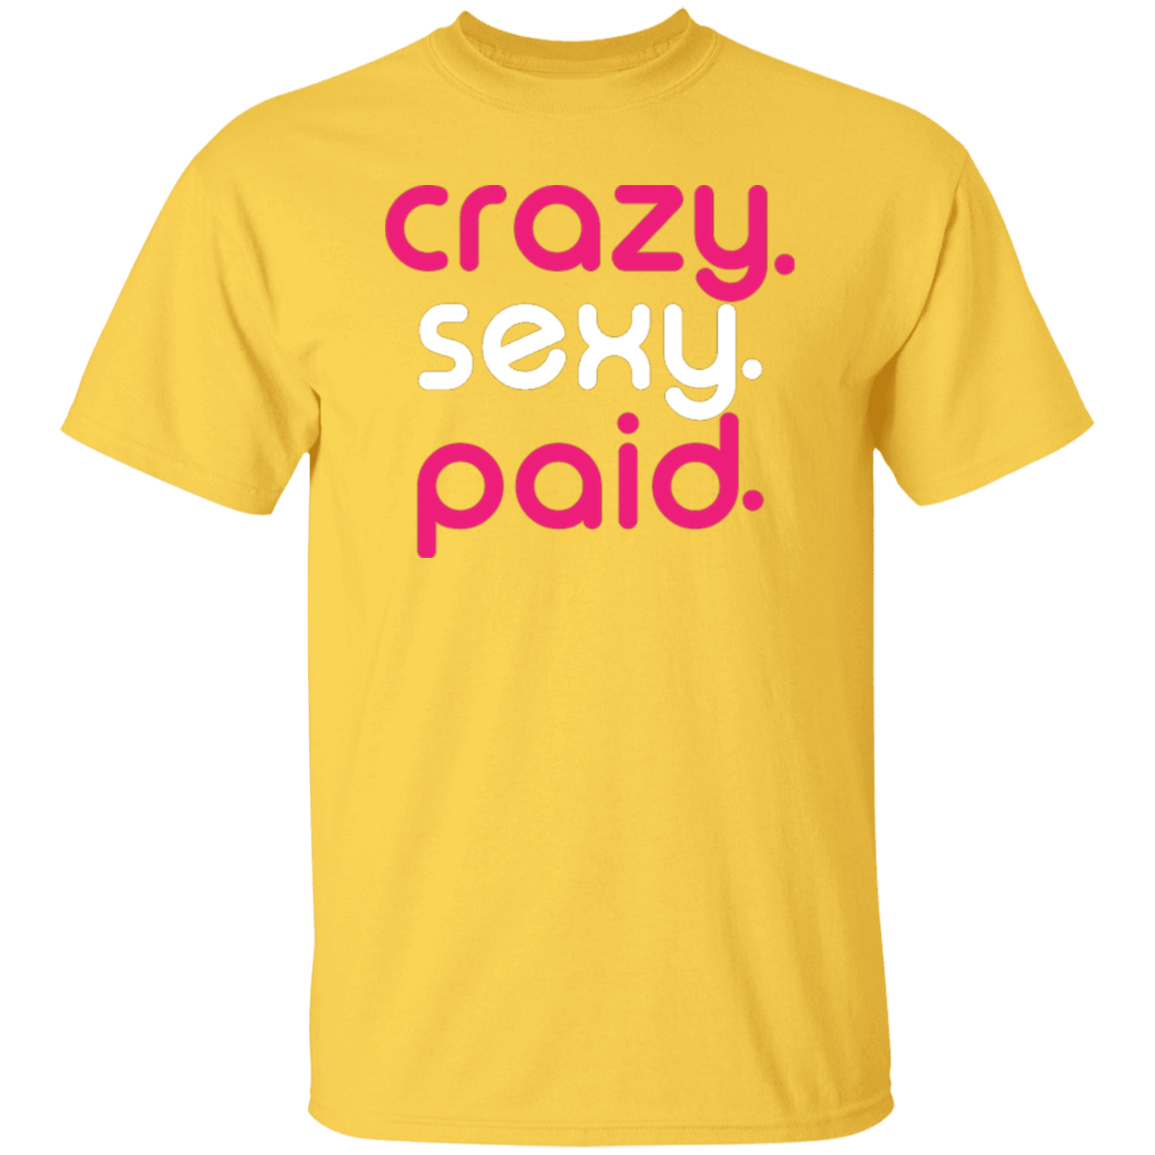 crazy sexy paid -  T-Shirt